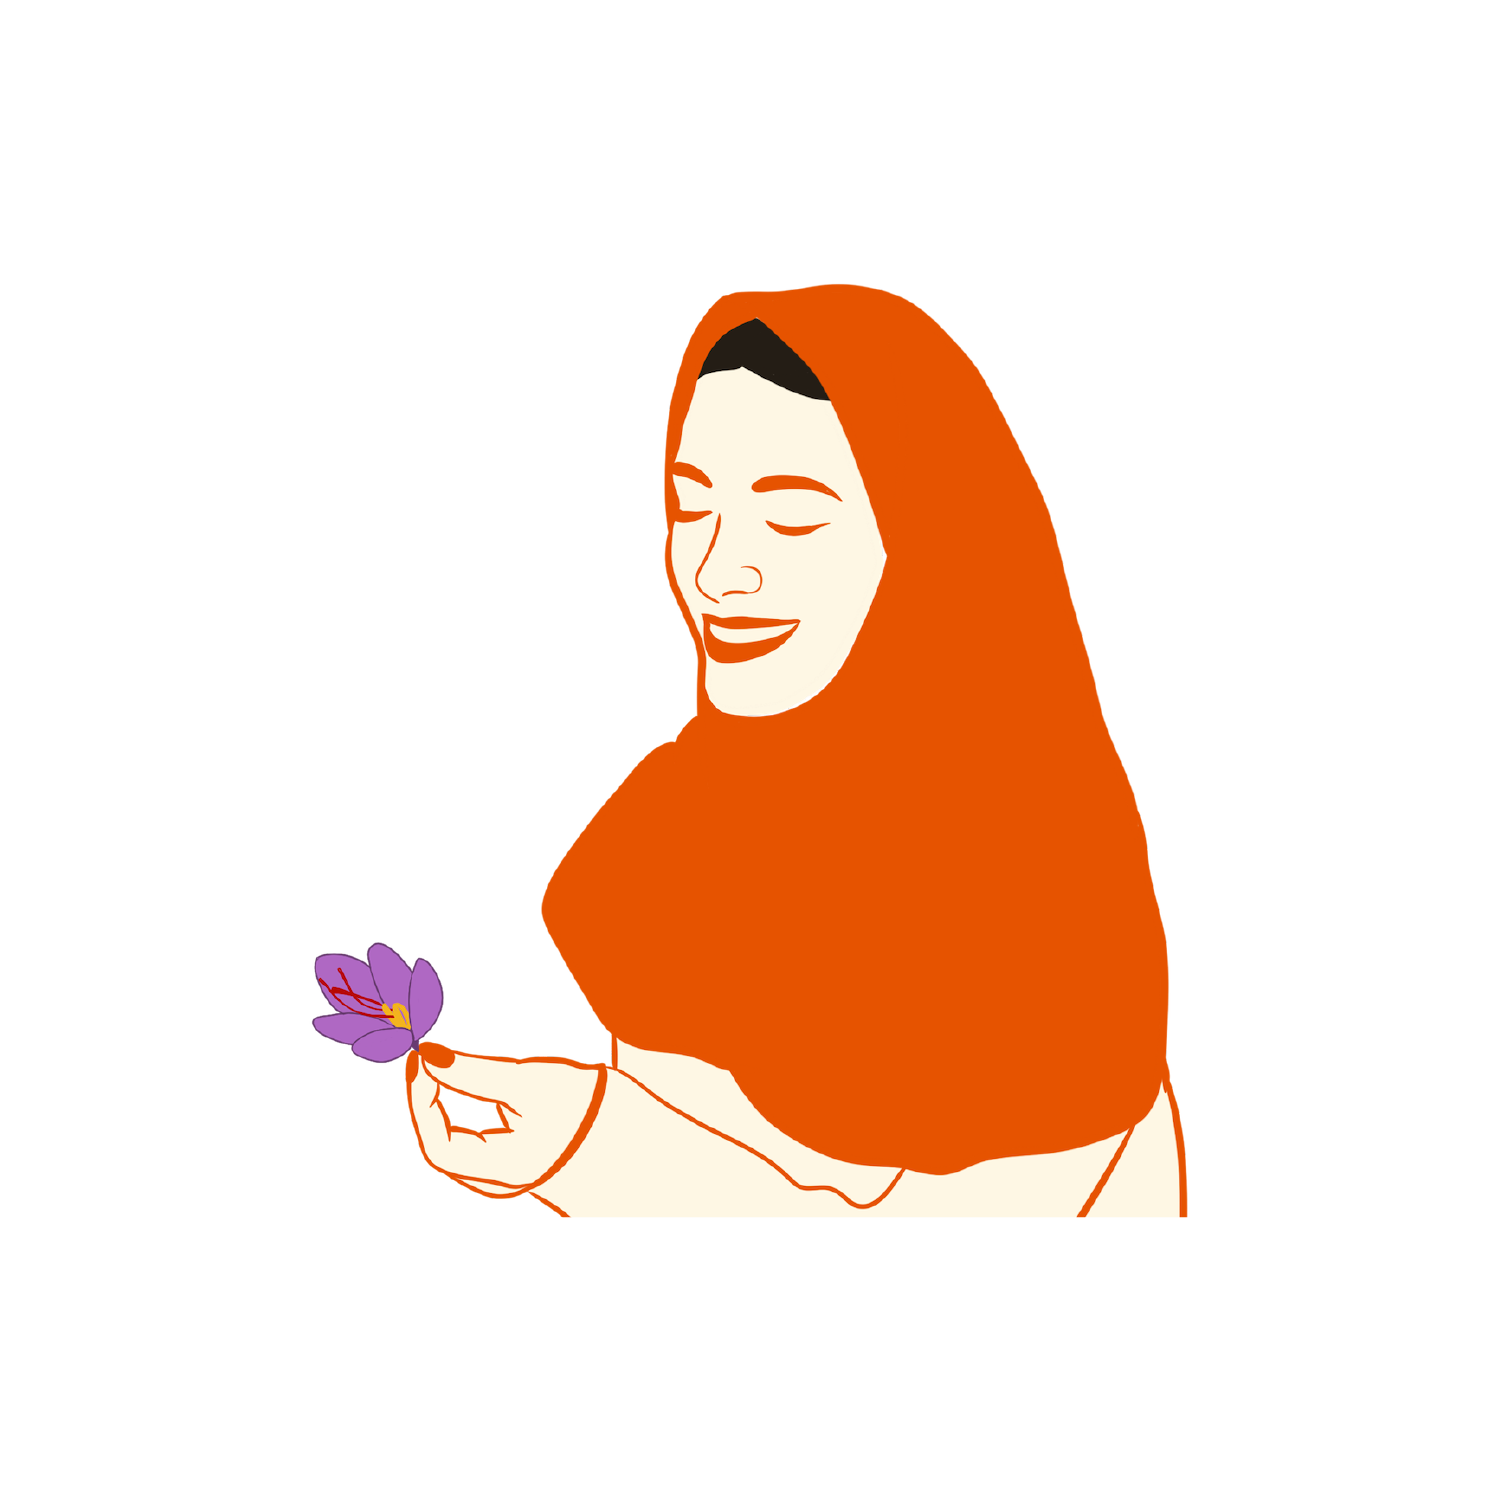 A charming hand-drawn illustration portrays an Afghan woman, adding cultural richness to the page.